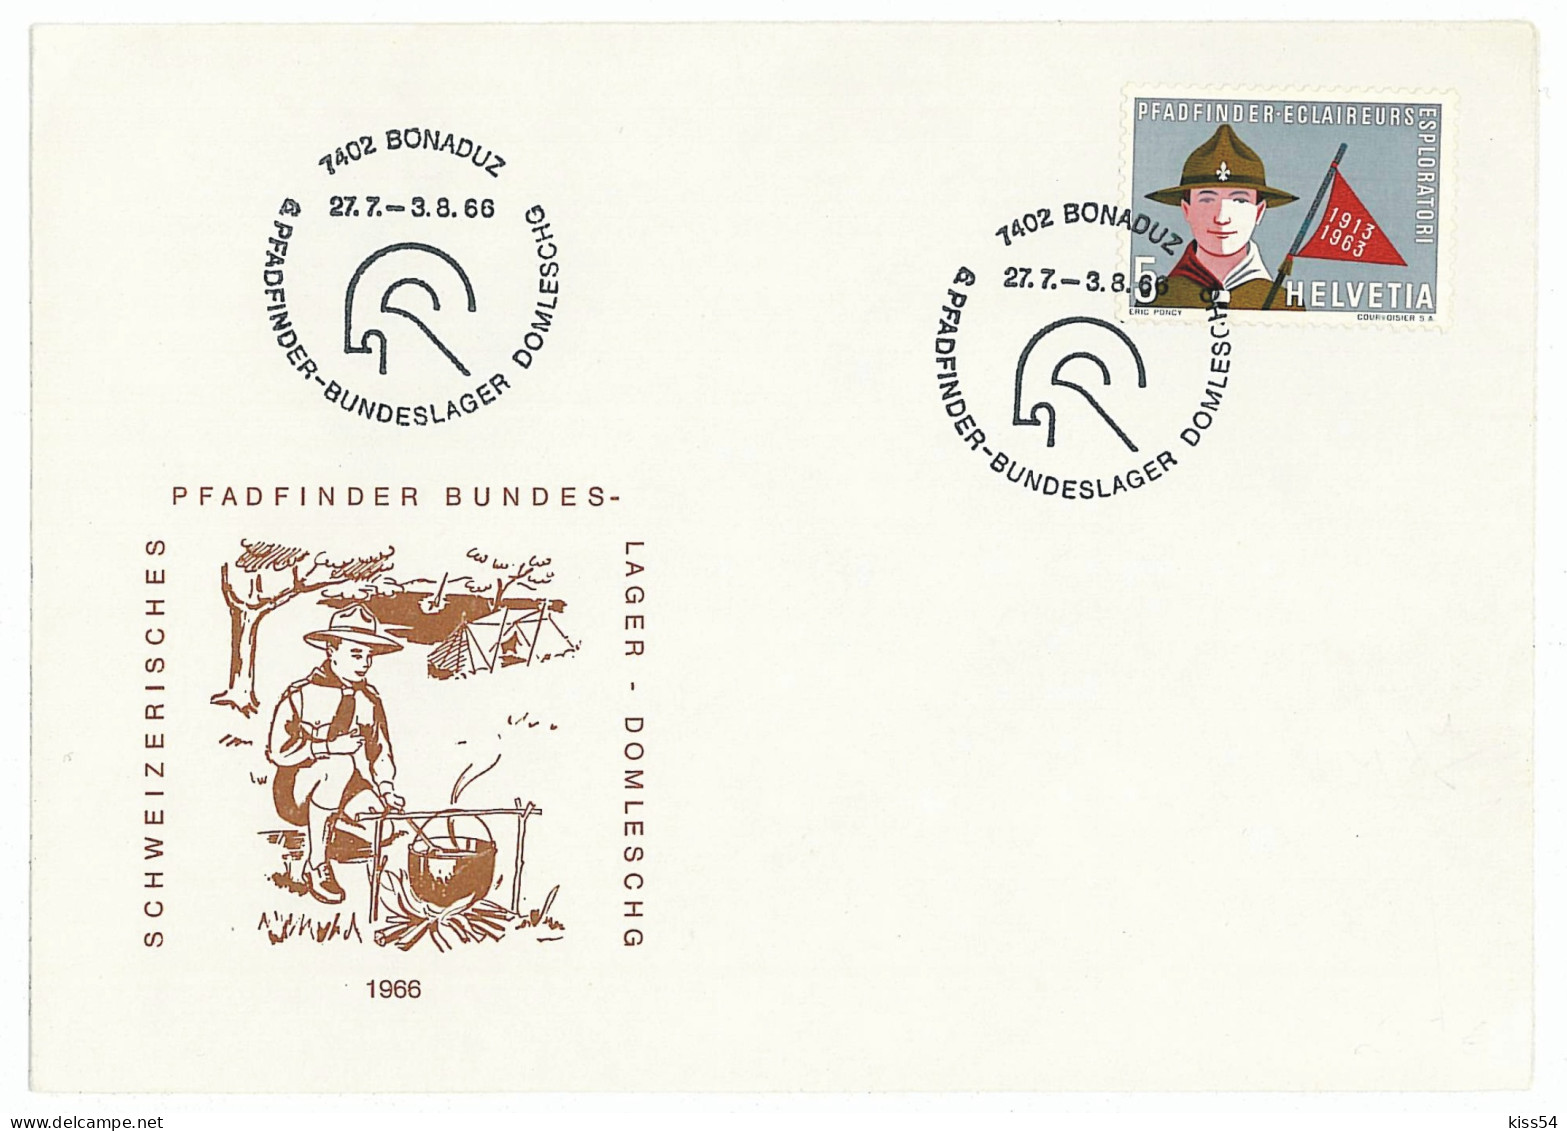 SC 06 - 477 SCOUT, Swetzerland - Cover - Used - 1966 - Covers & Documents